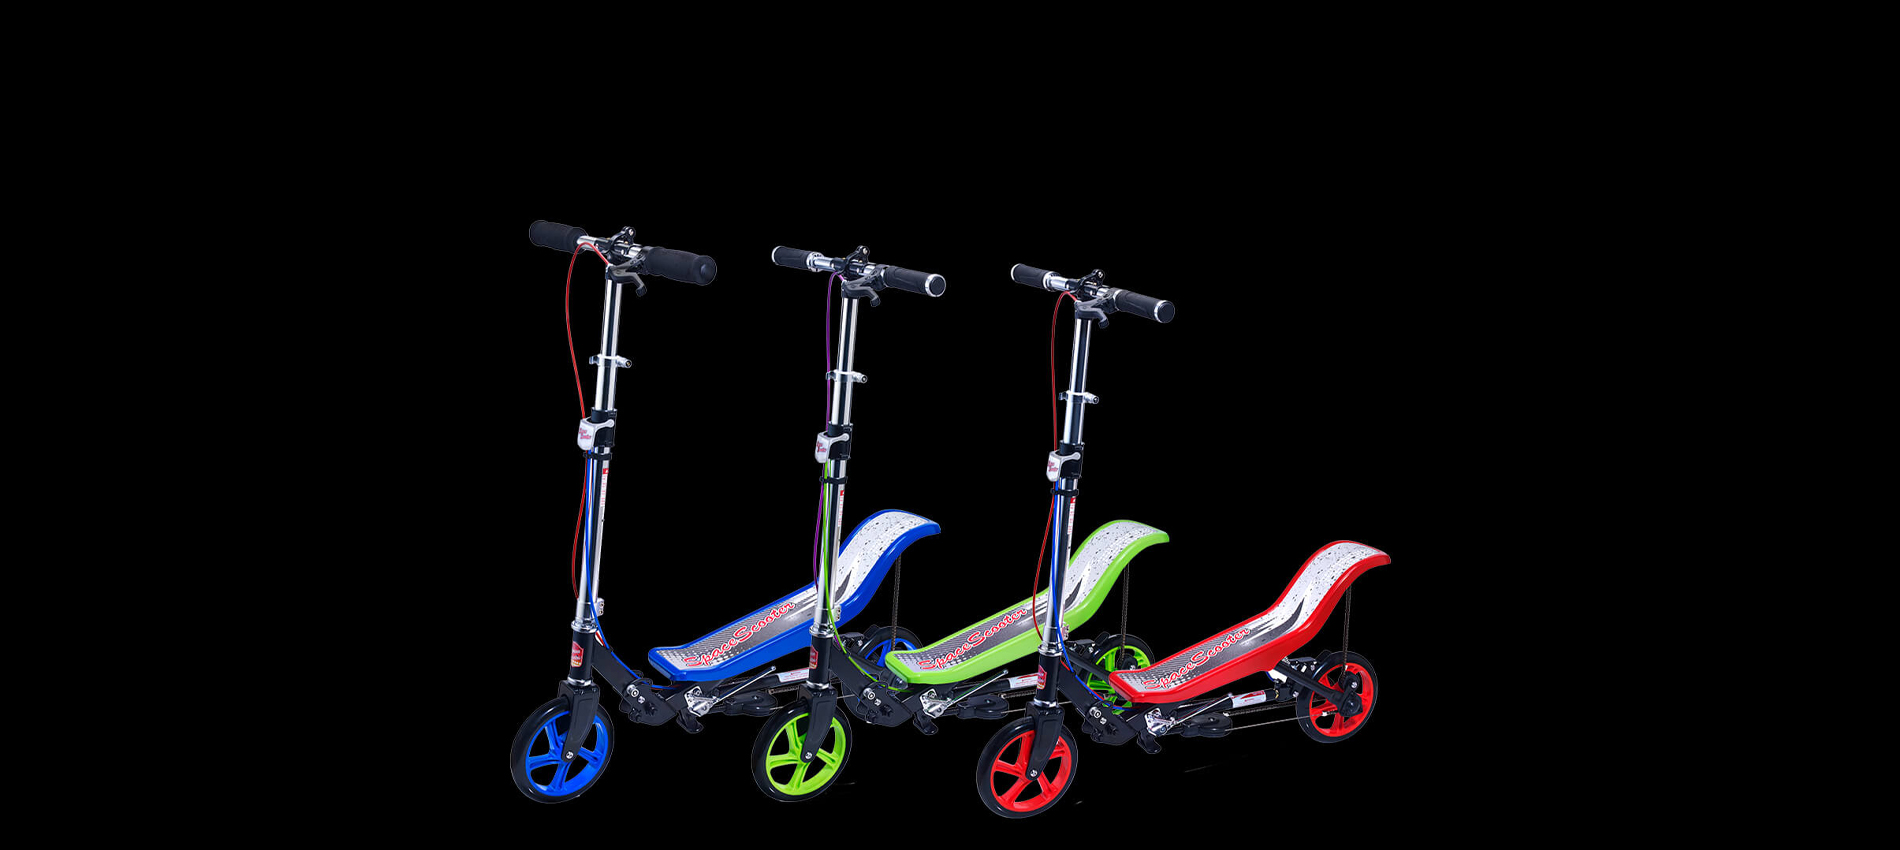 Space Scooter X590 series